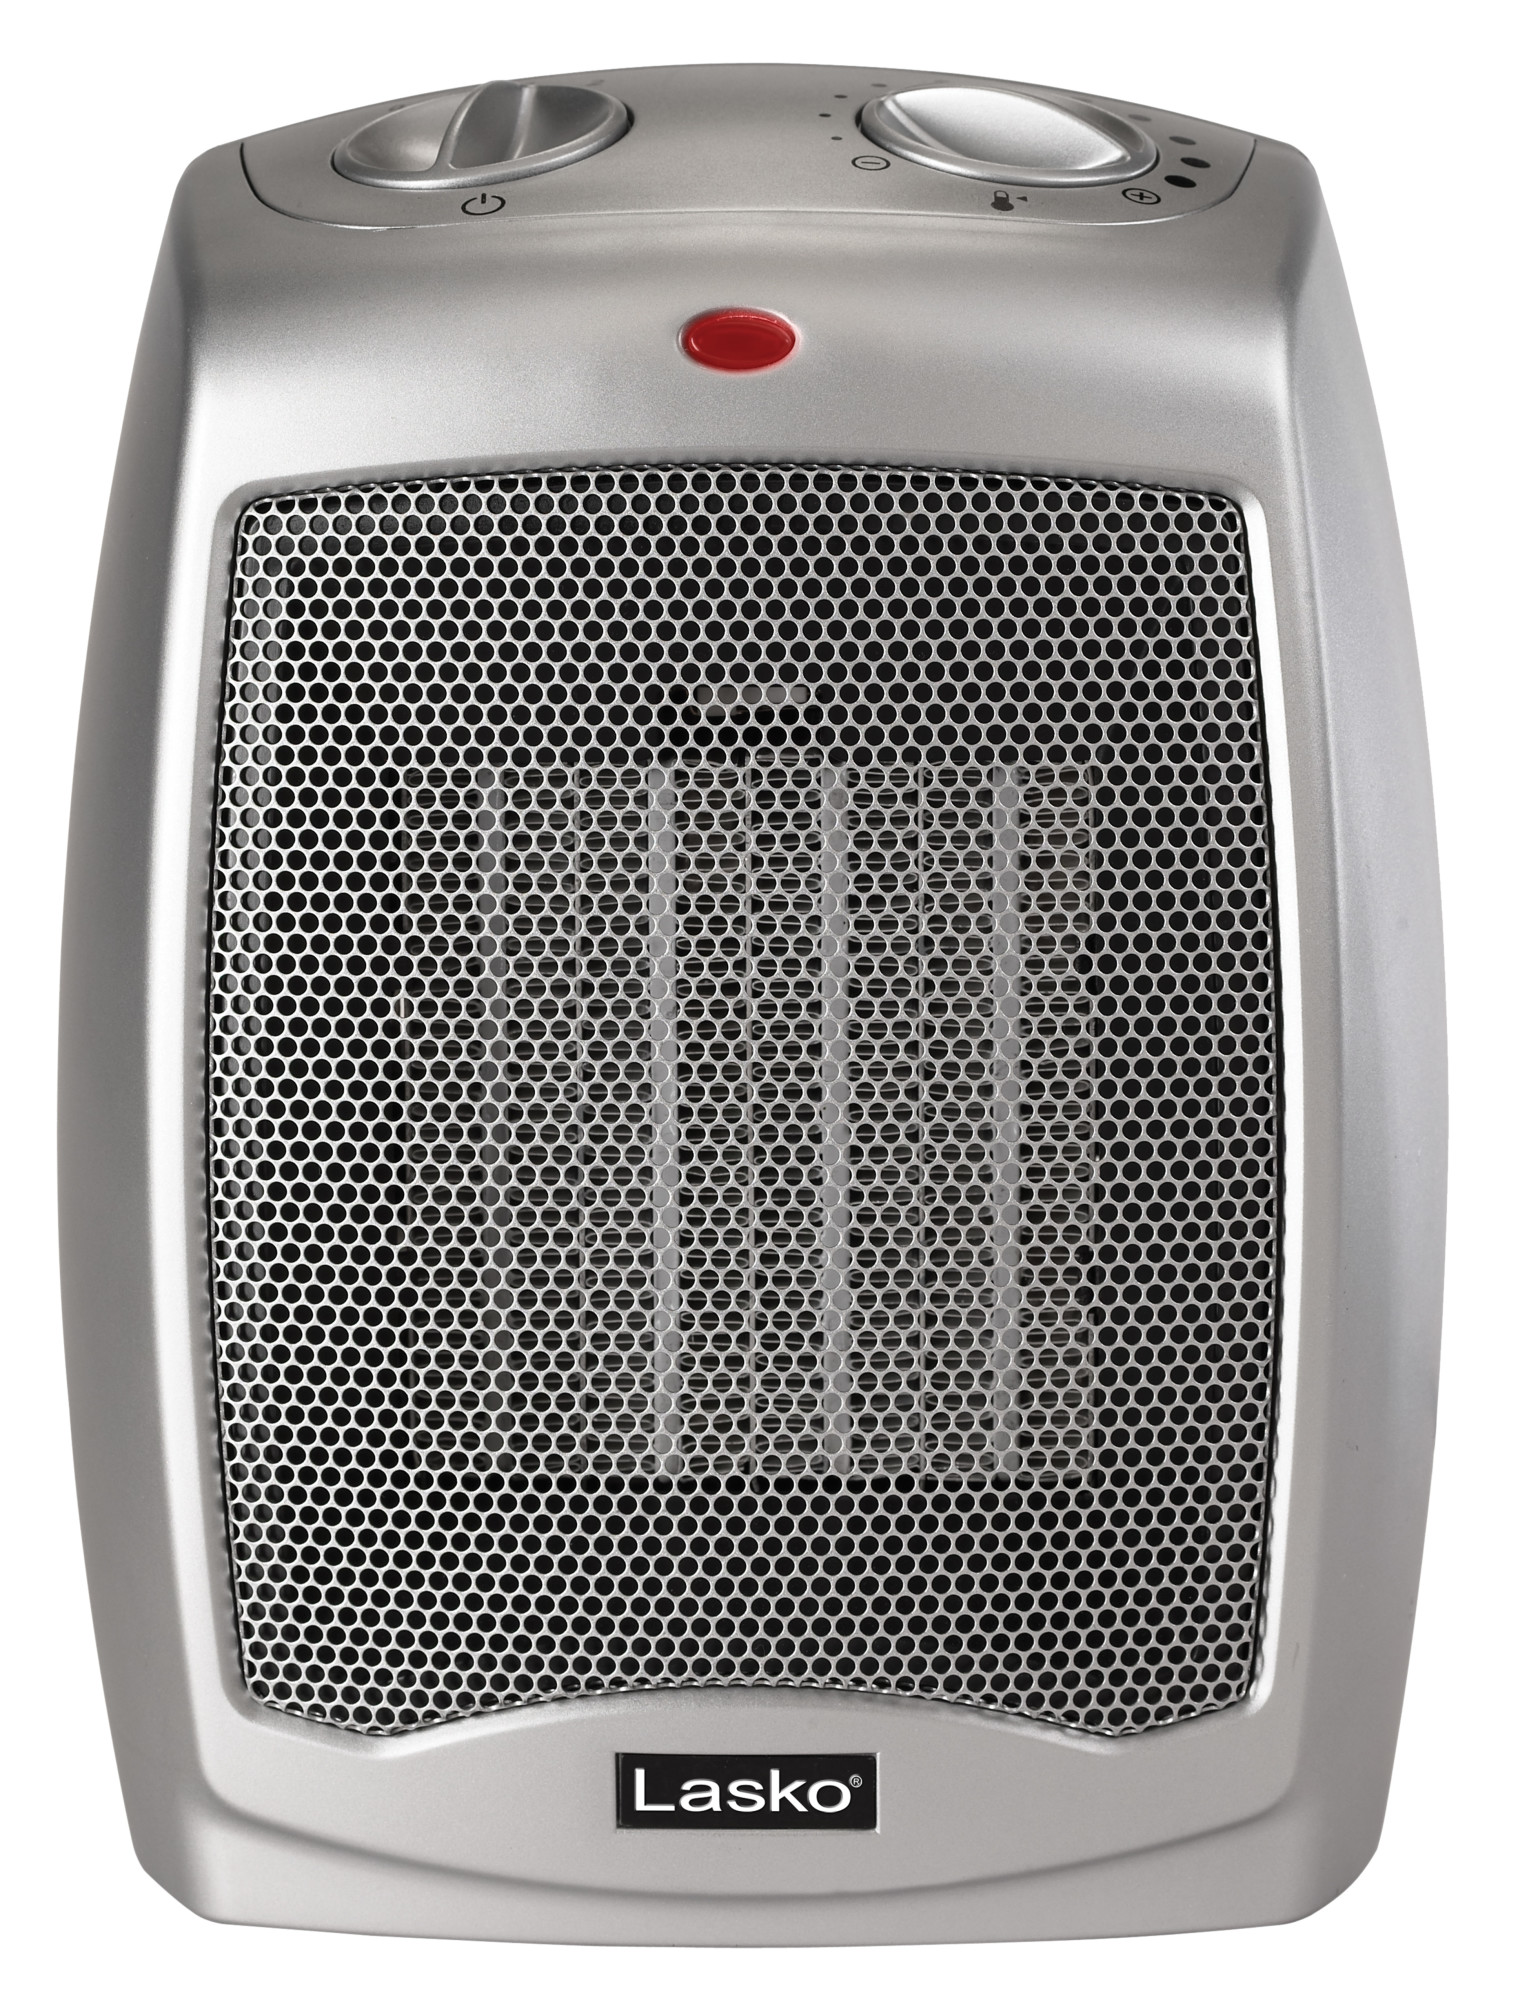 Lasko 9" 1500W Electric Ceramic Space Heater with Adjustable Thermostat, Silver, 754200, New - image 3 of 6